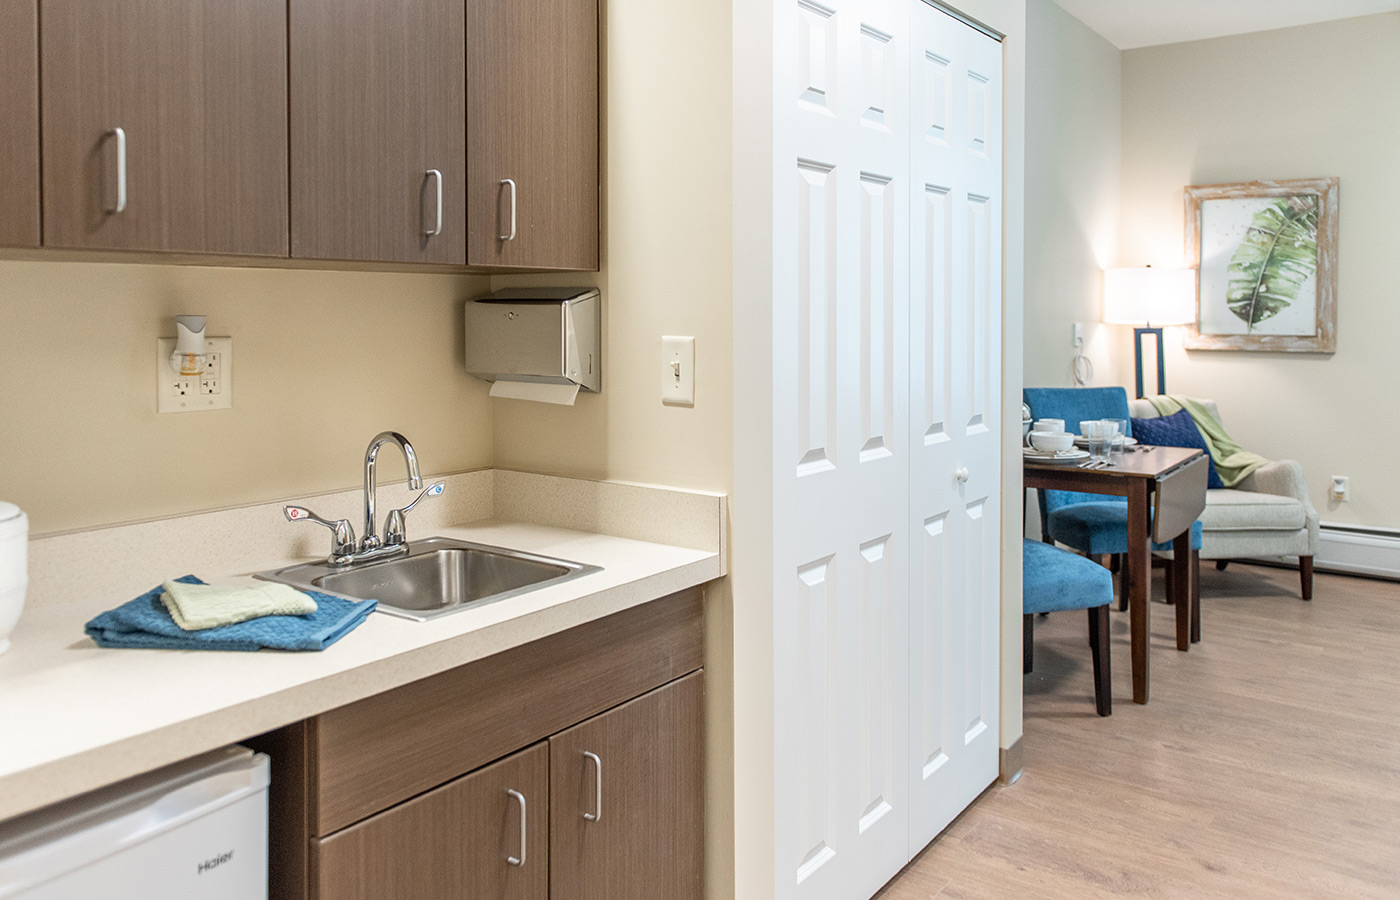 A kitchen in an apartment at The Legacy at Maiden Park.